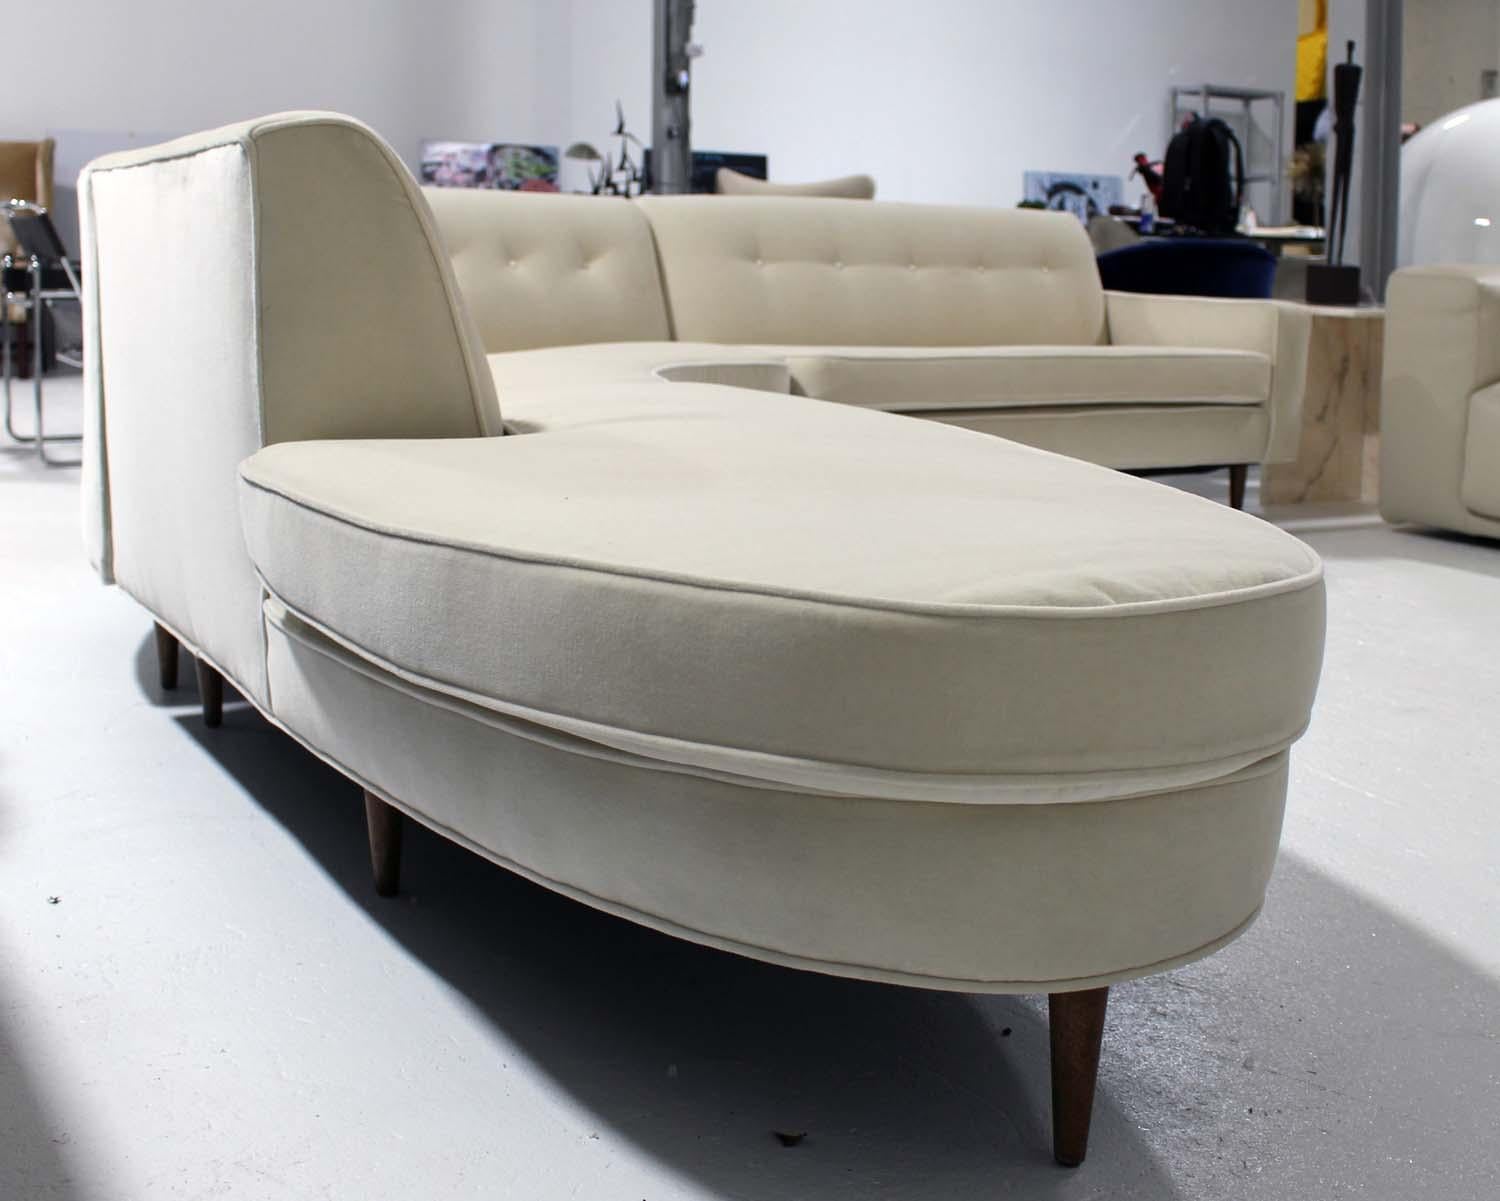 Amazing statement piece for any living room, or seating area. This 3-piece cream velvet sectional has iconic lines, beautiful new velvet upholstery, walnut legs, and incredible styling.